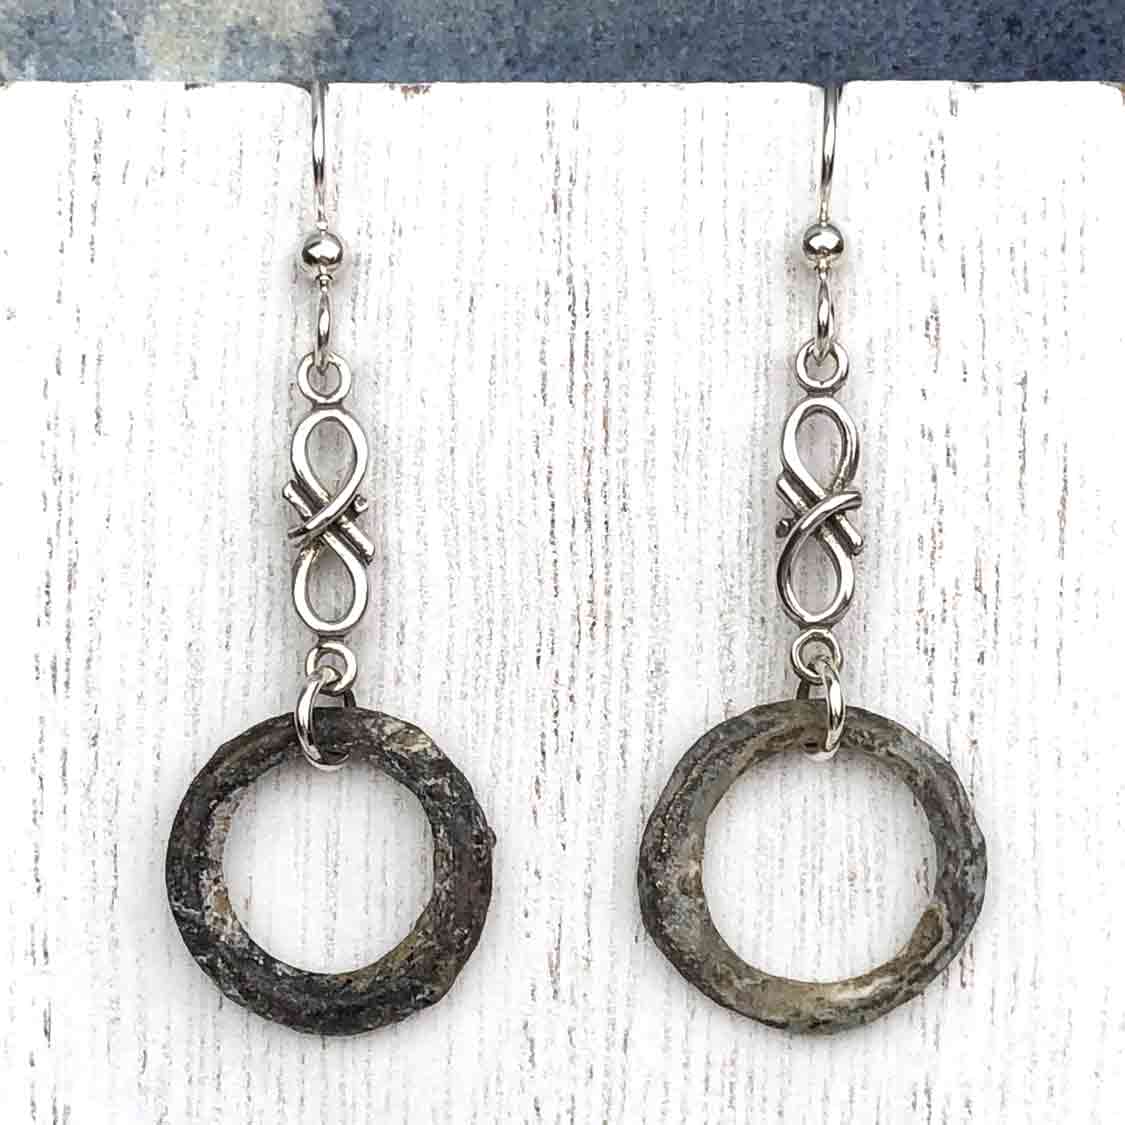 Dark Green Bronze Celtic Ring Money Earrings with Infinity Charms